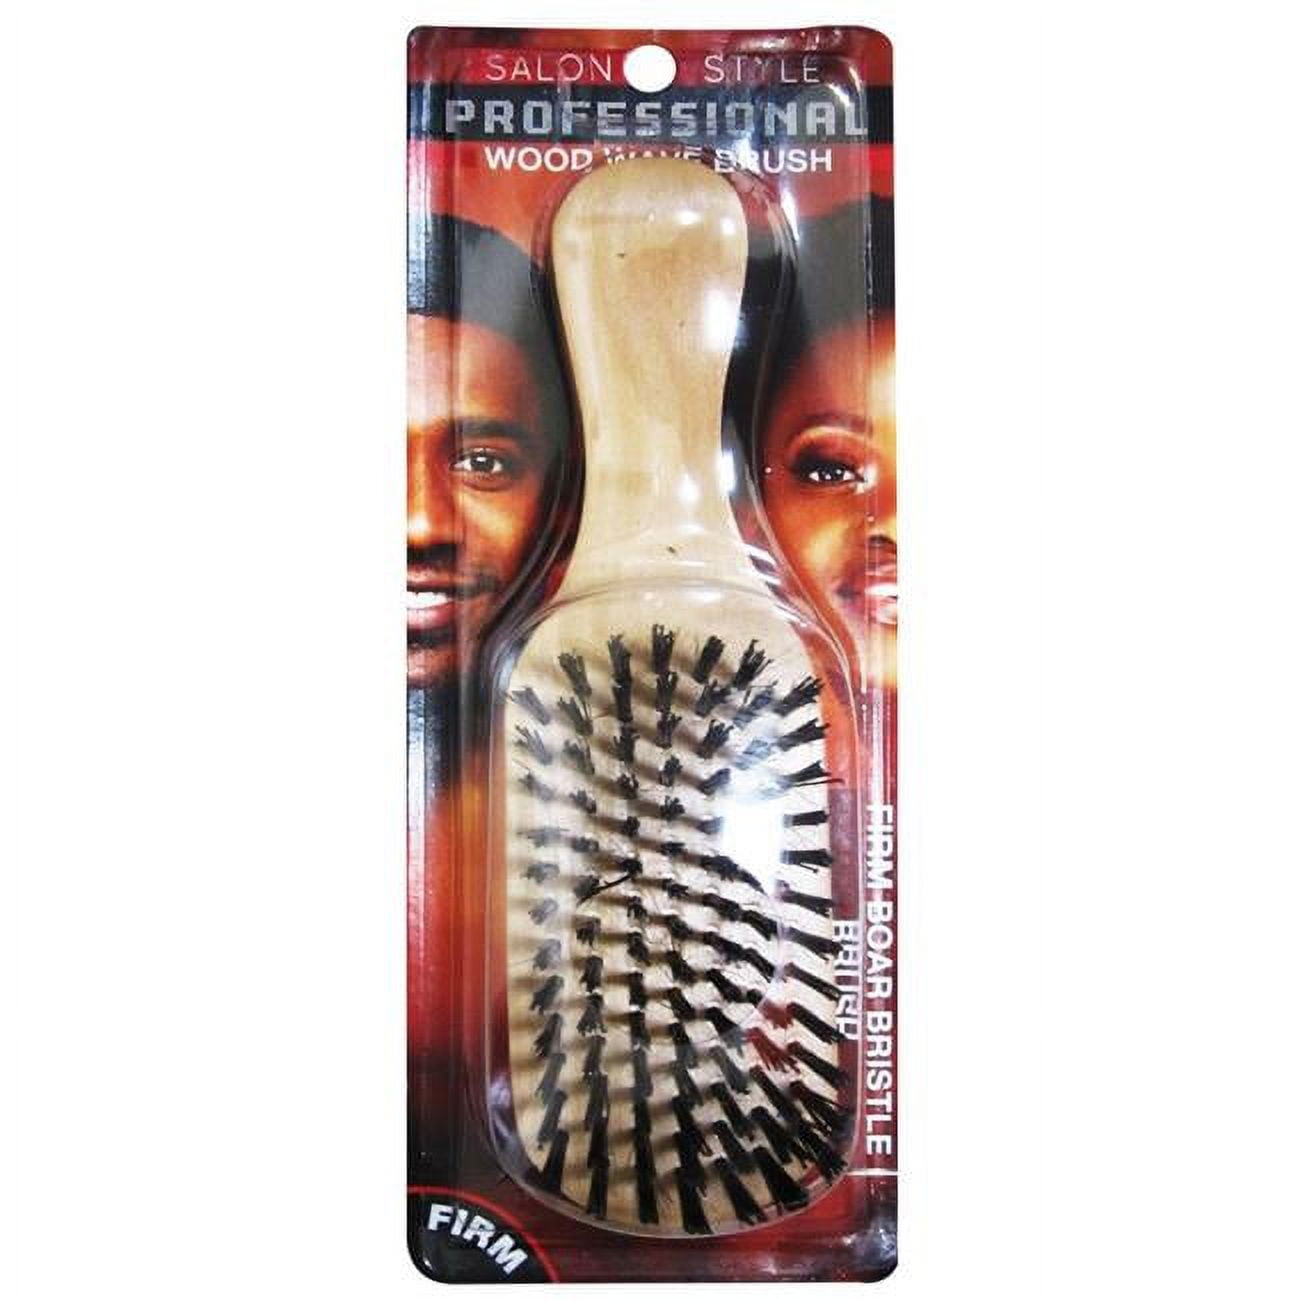 Picture of DDI 2316239 Firm Boar Bristle Hair Brush Case of 24